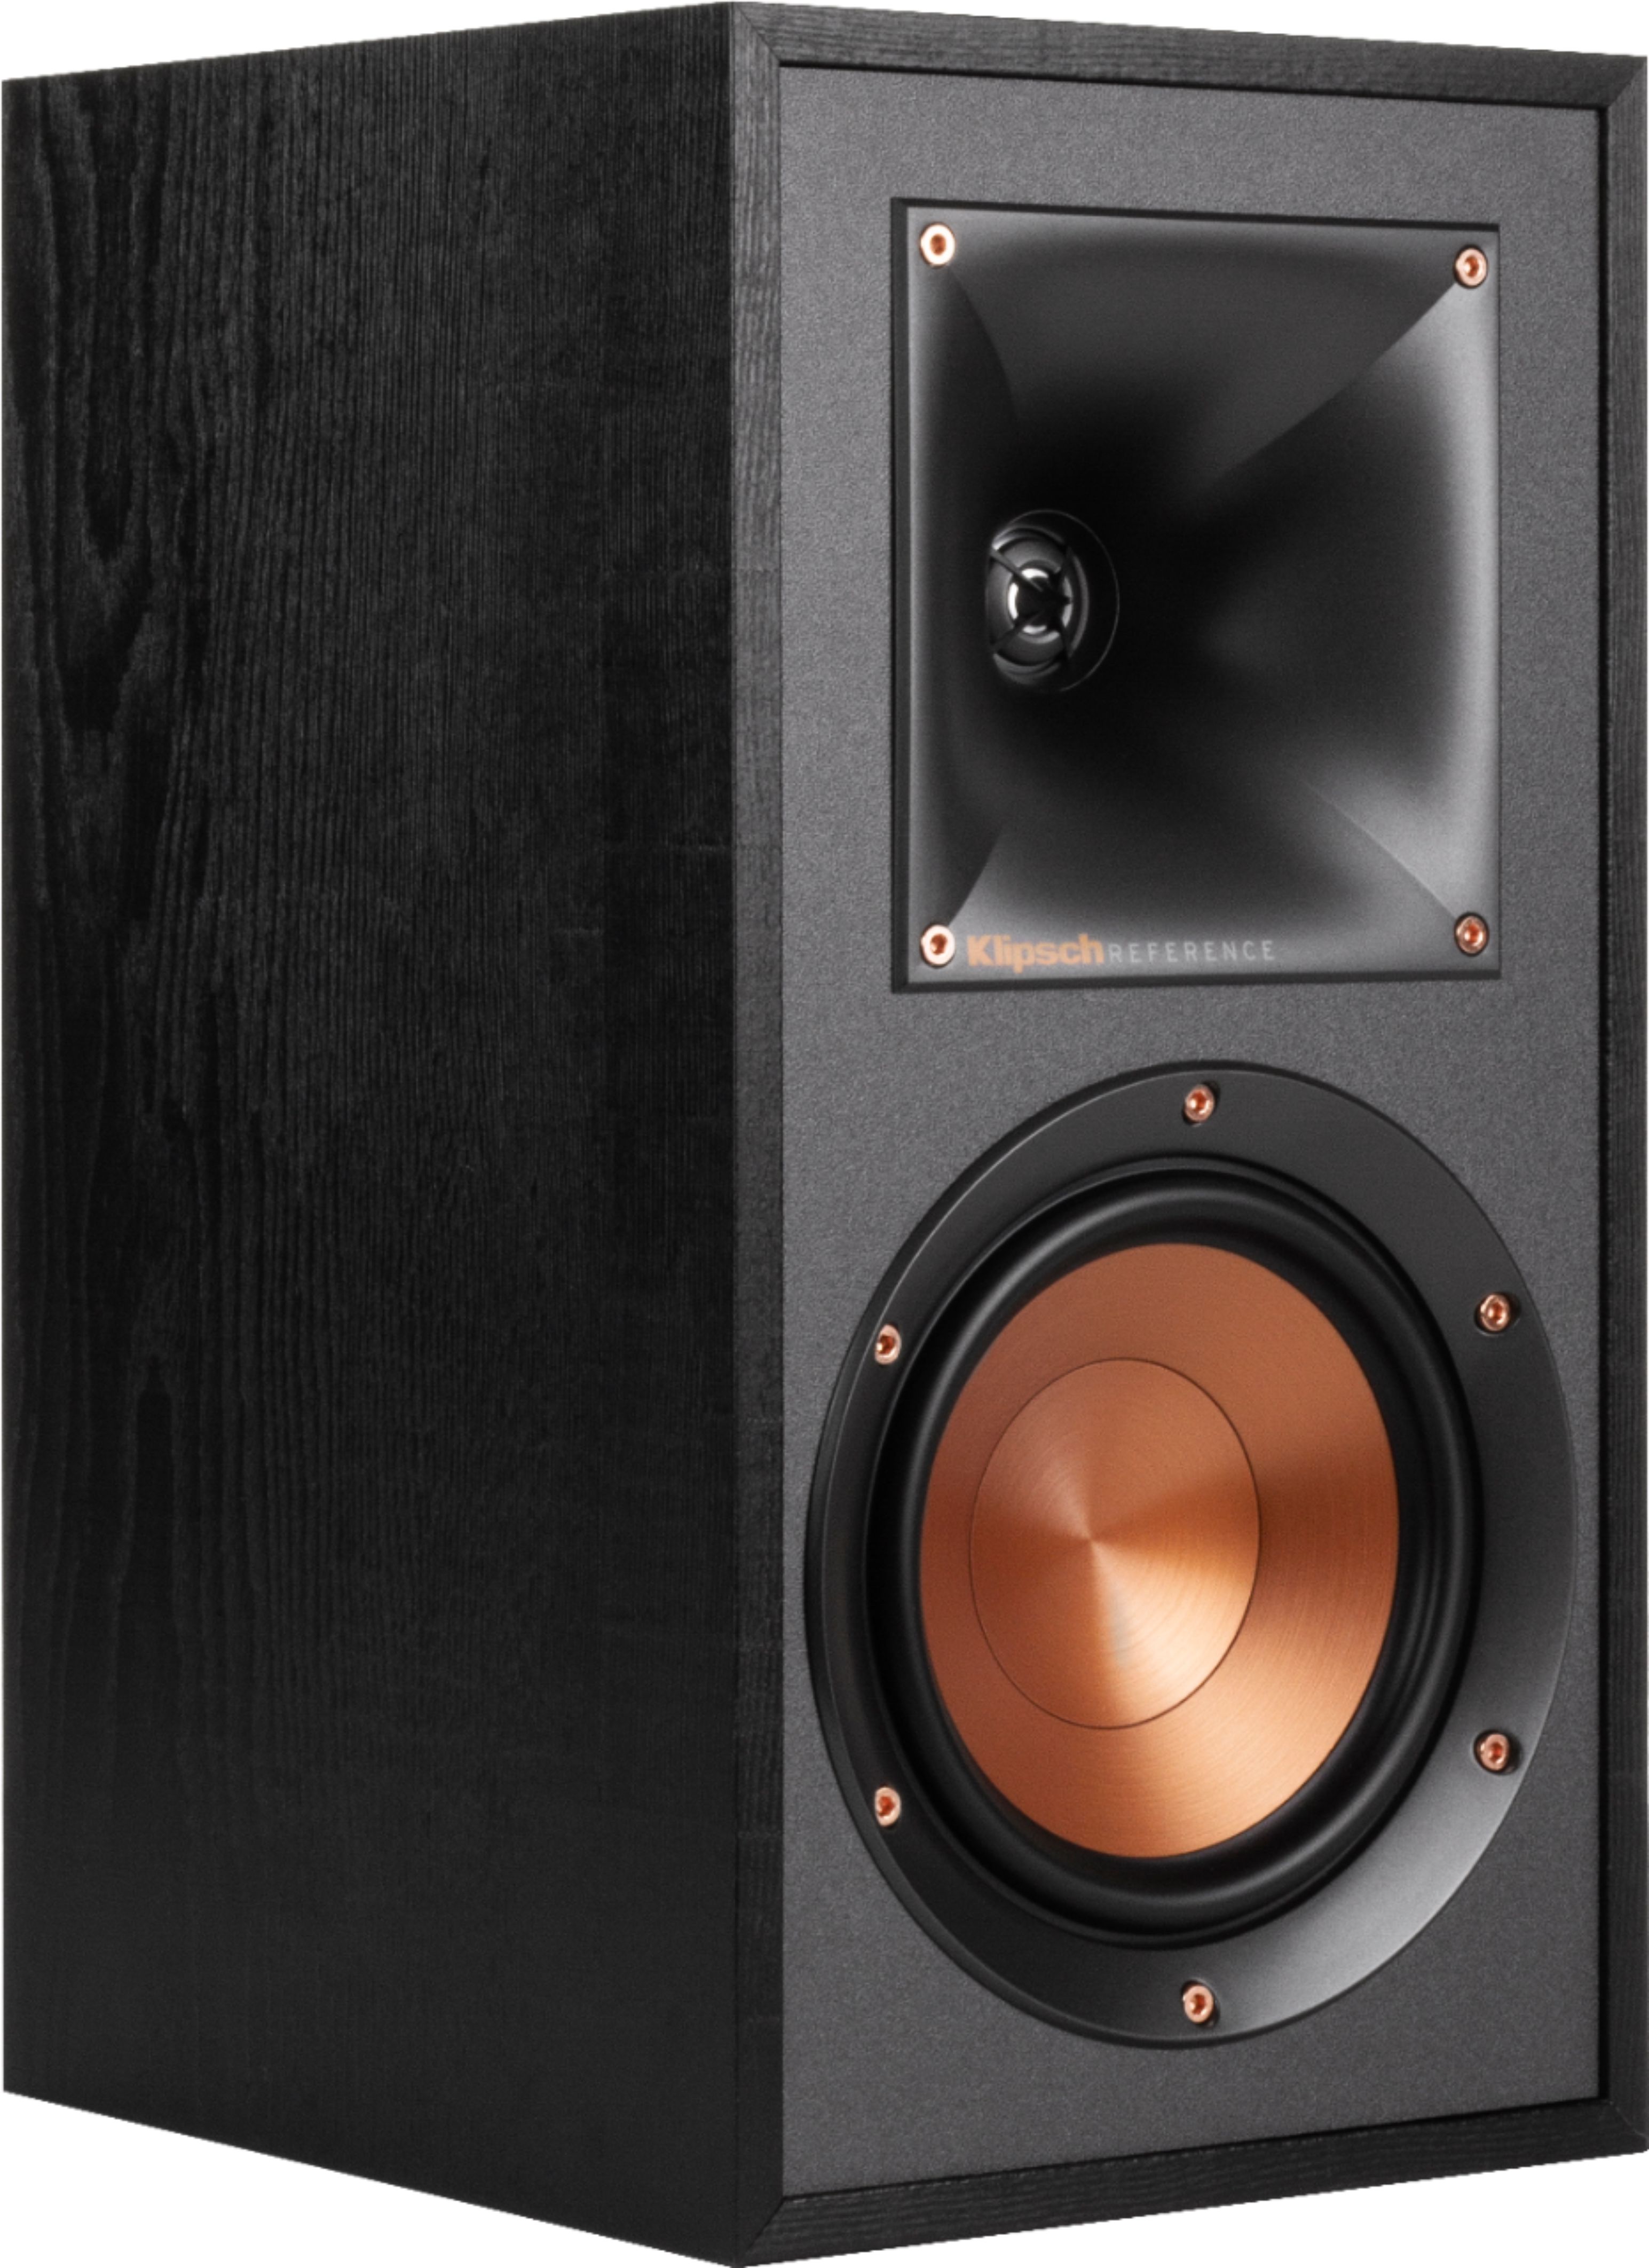 Angle View: KEF - LSX Hi-Res Wireless Speakers - Black